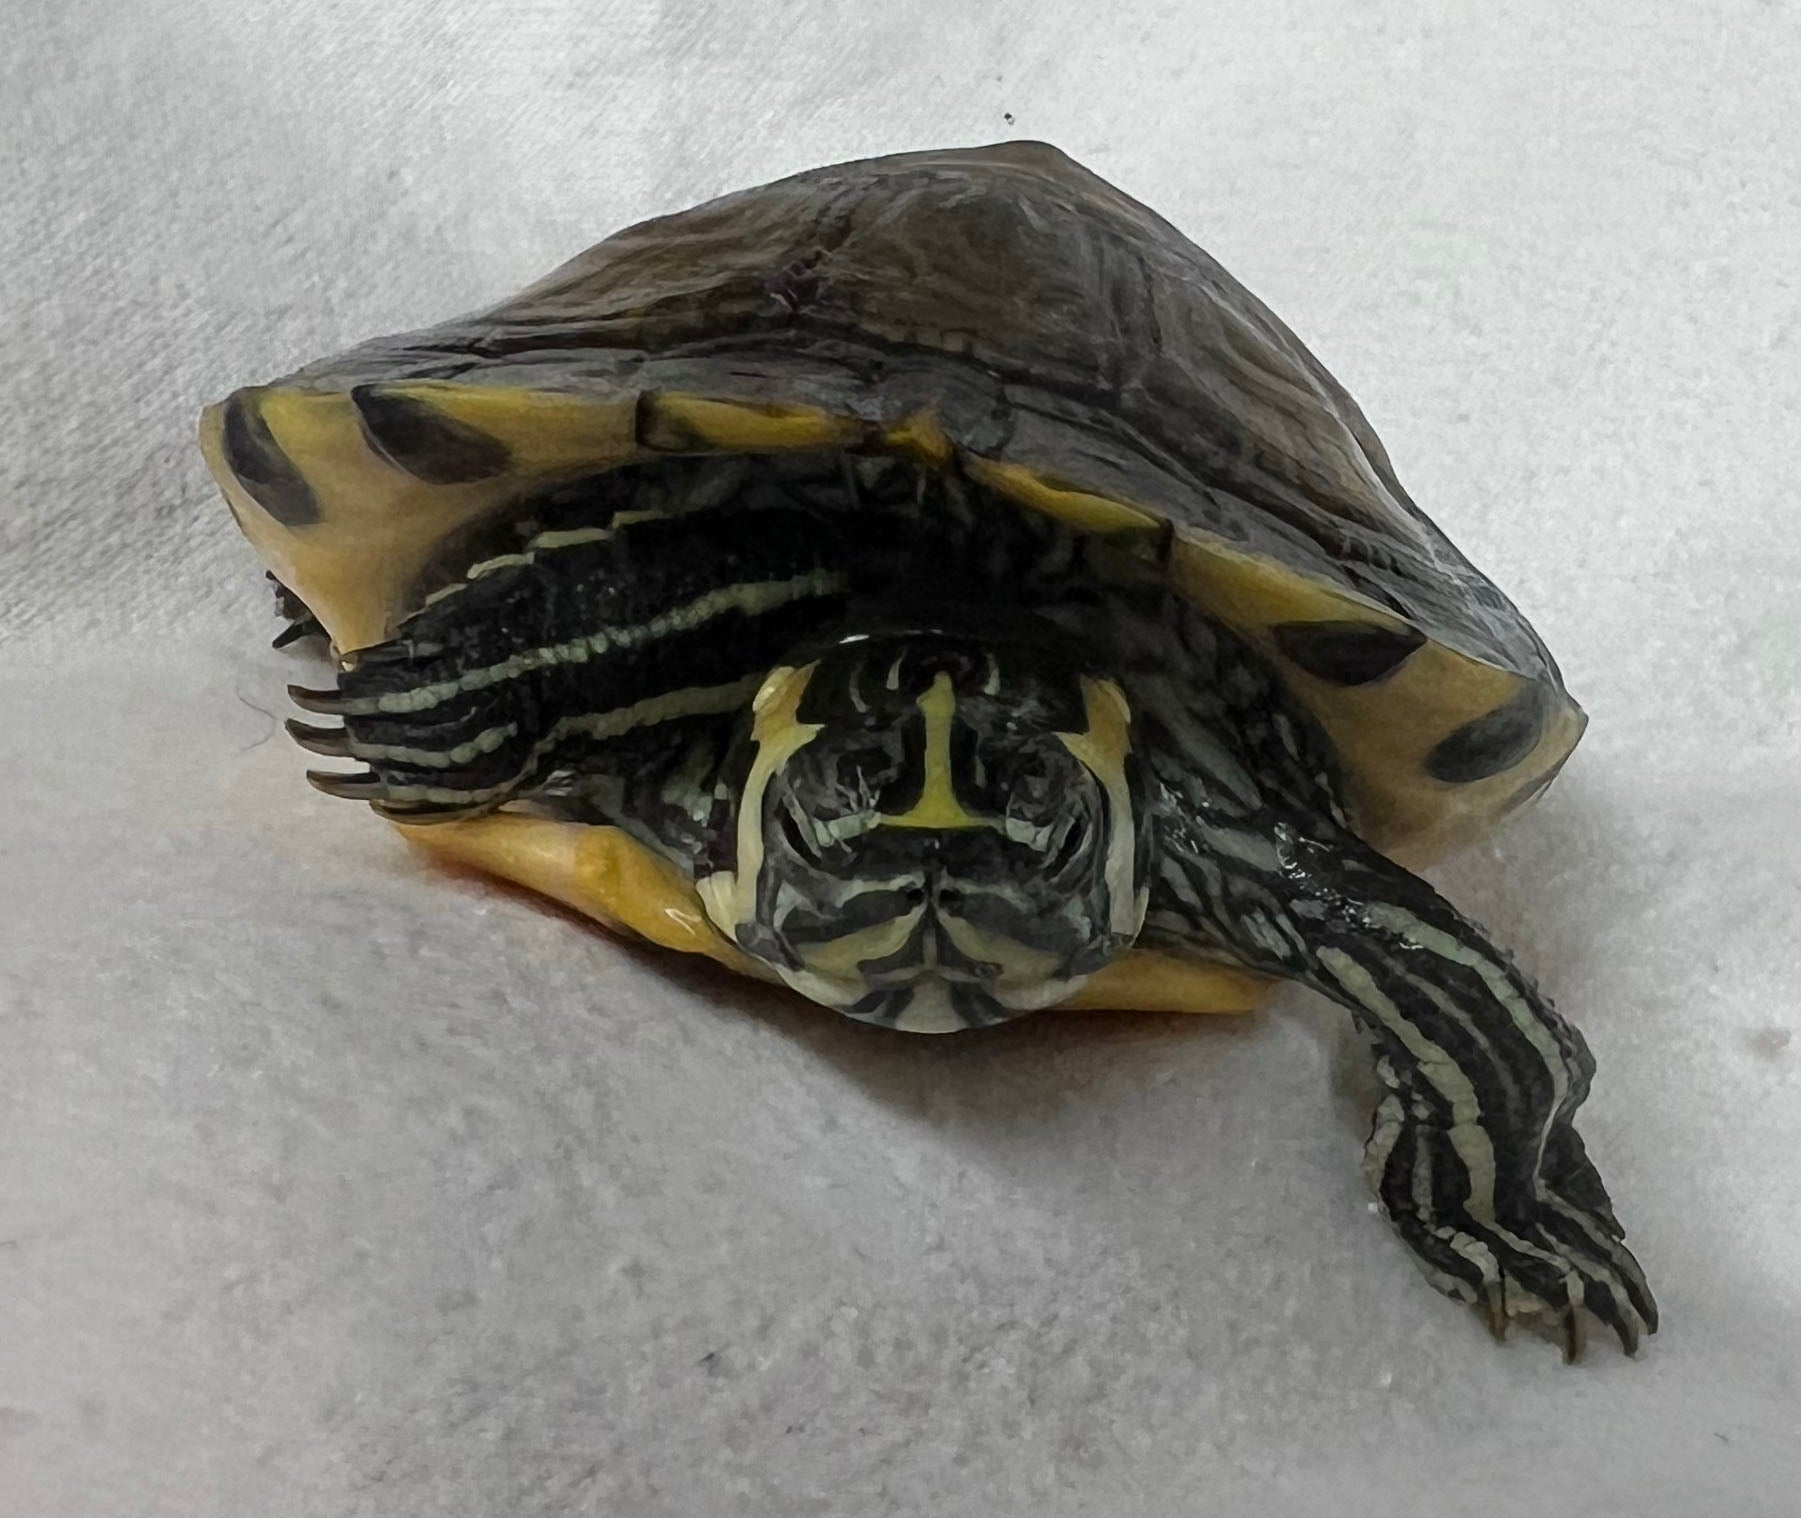 The Fascinating World of the Yellow Belly Slider Turtle